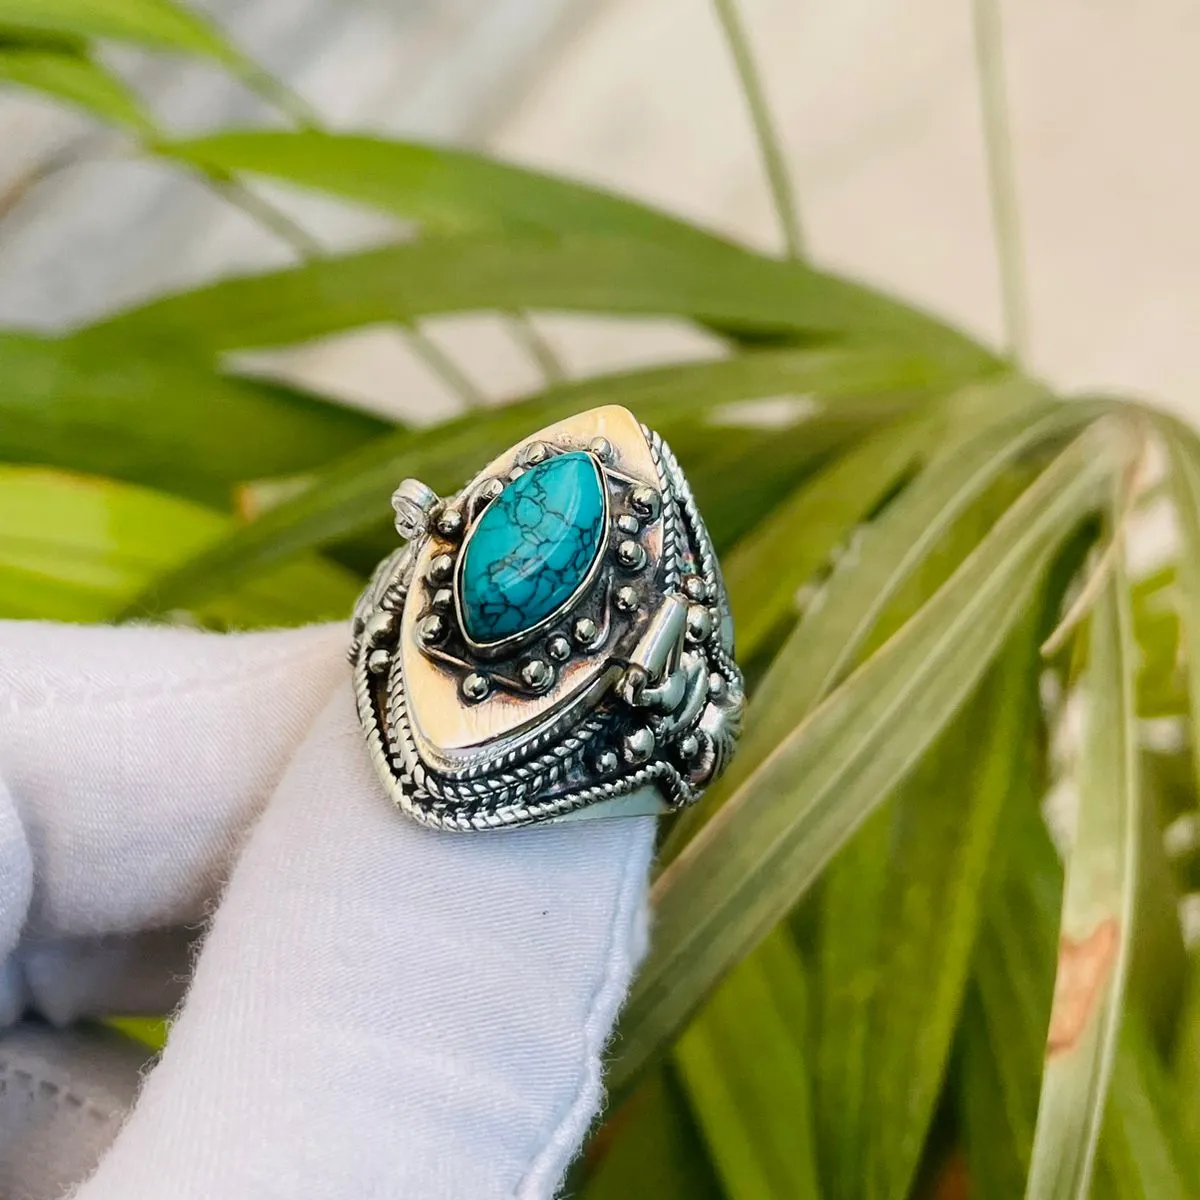 Wholesale Brass Poison Rings With Floral Design Silver Plating And Natural Turquoise Gemstone For Women And Girls